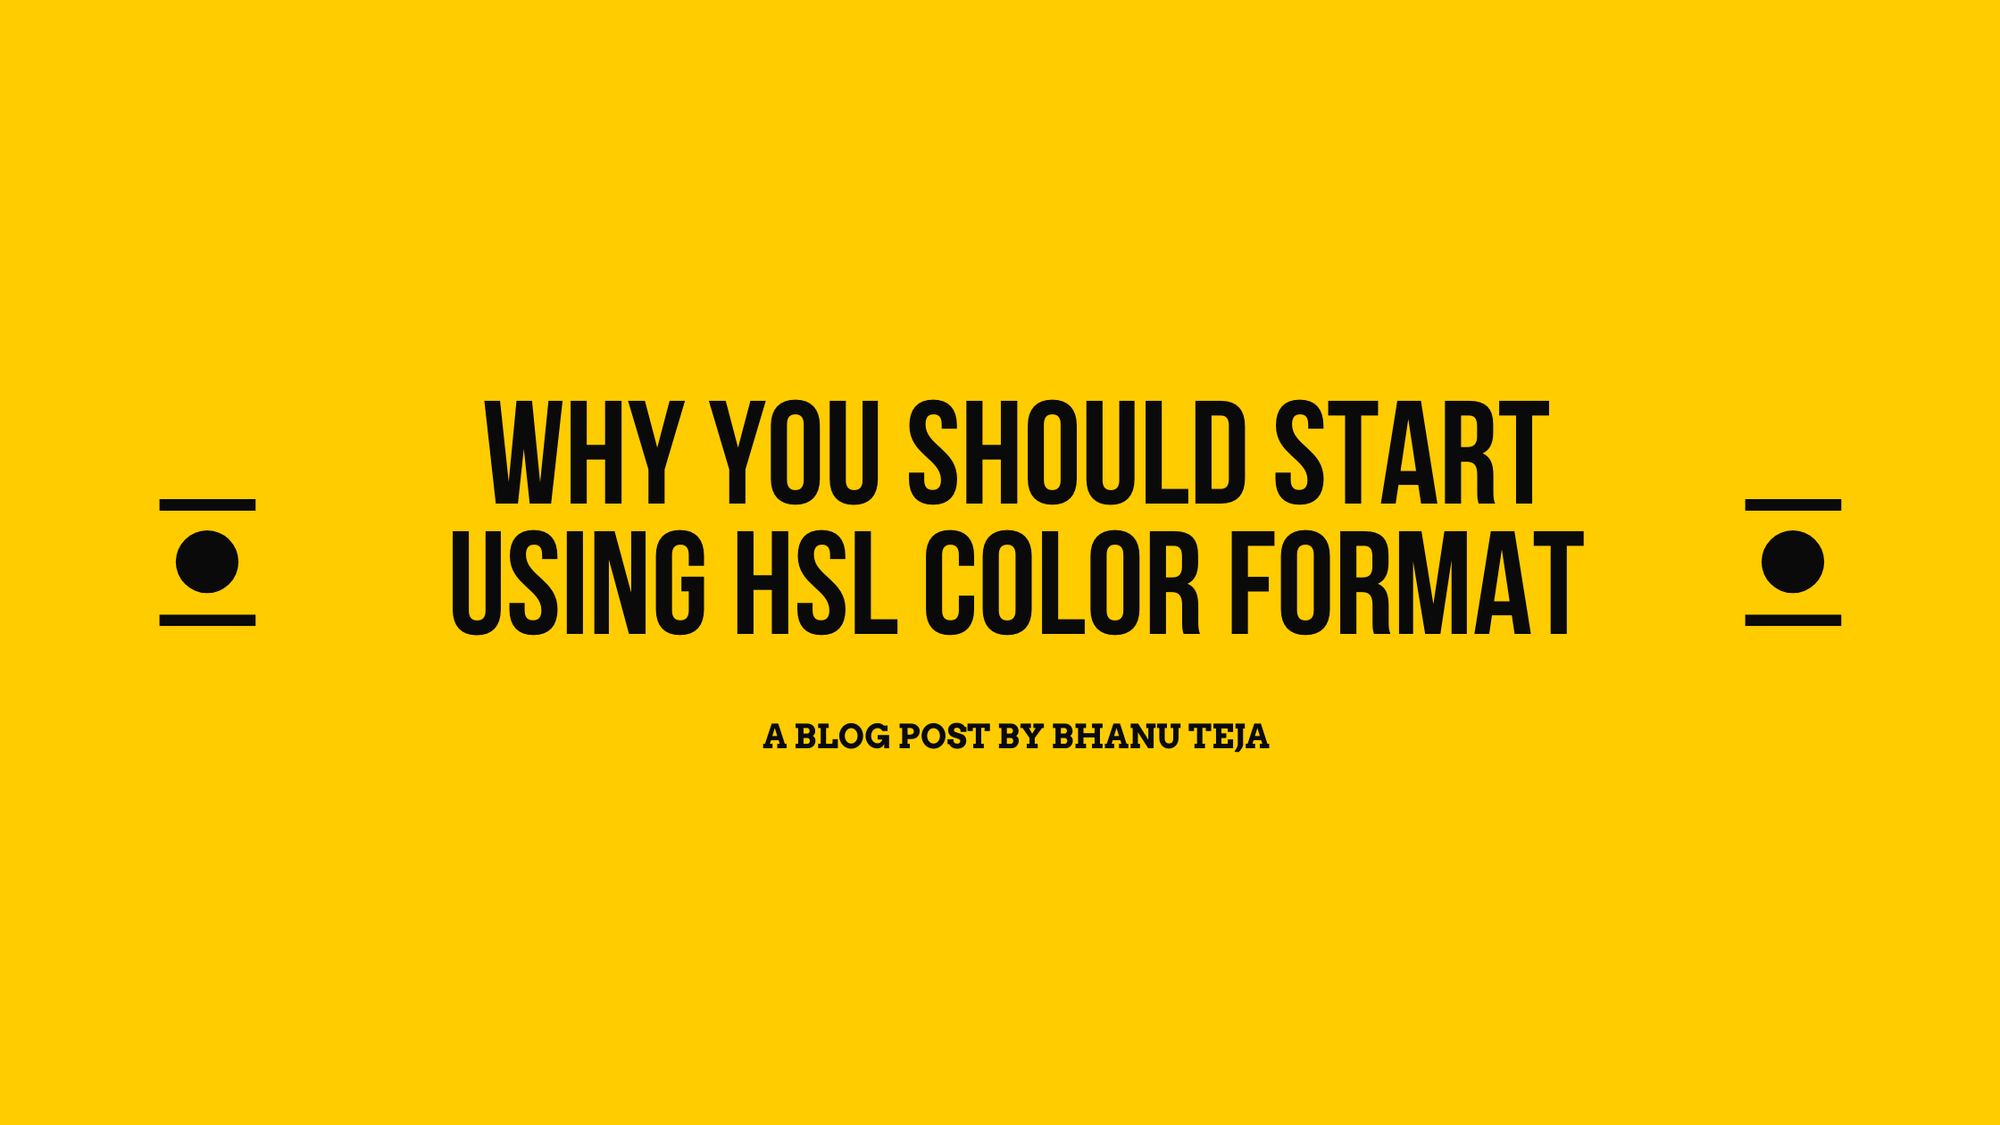 Why you should start using HSL color format